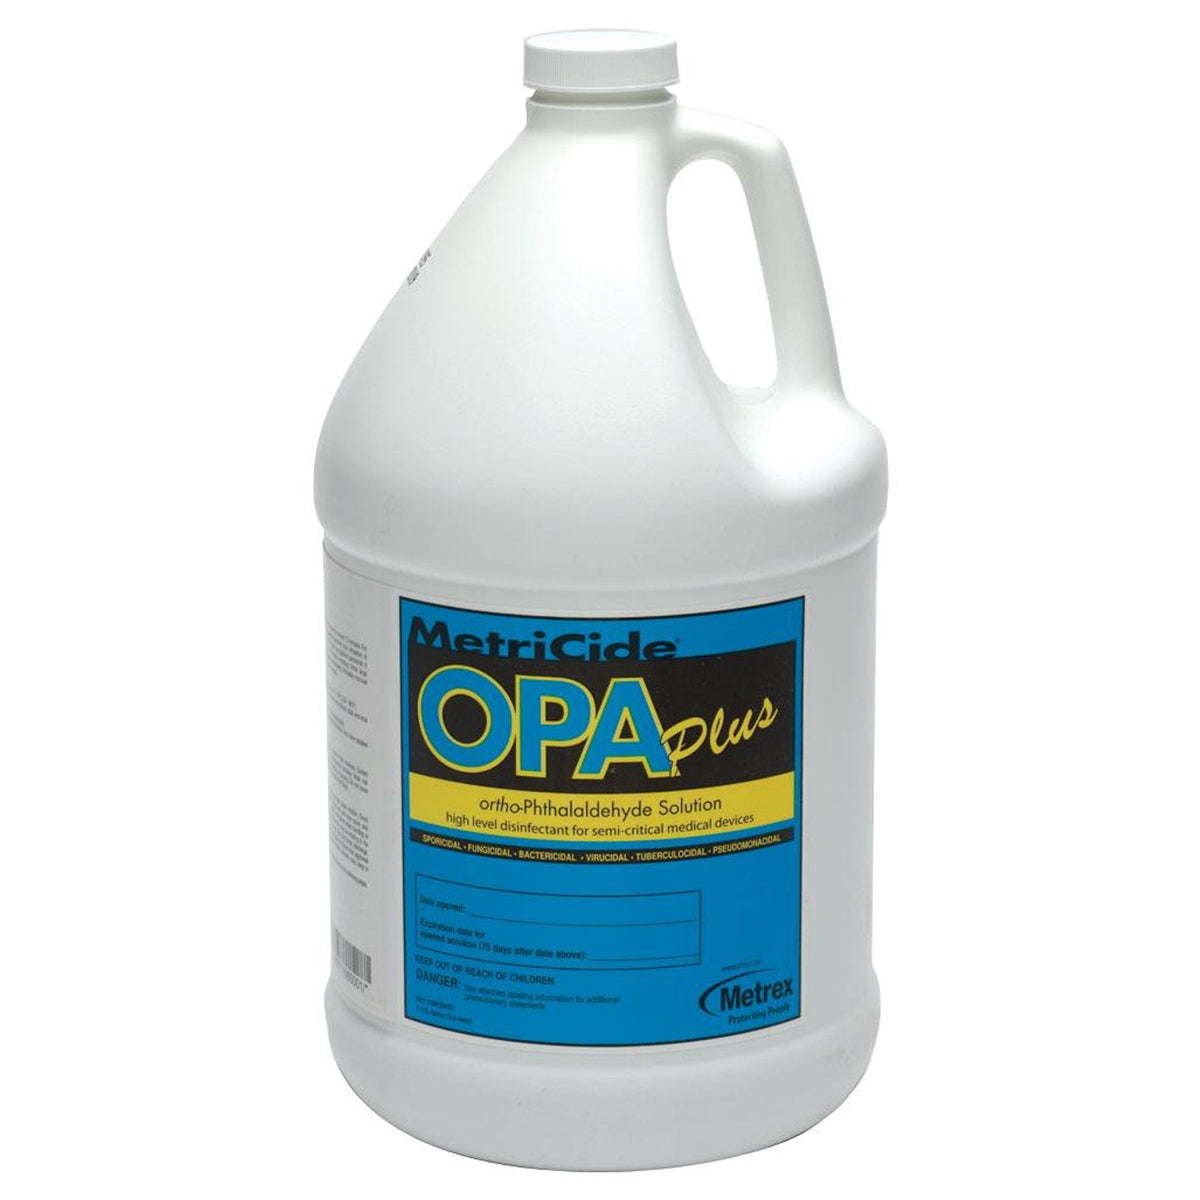 MetriCide® OPA Plus OPA High-Level Disinfectant, 1 gal Jug - American Hospital Supply